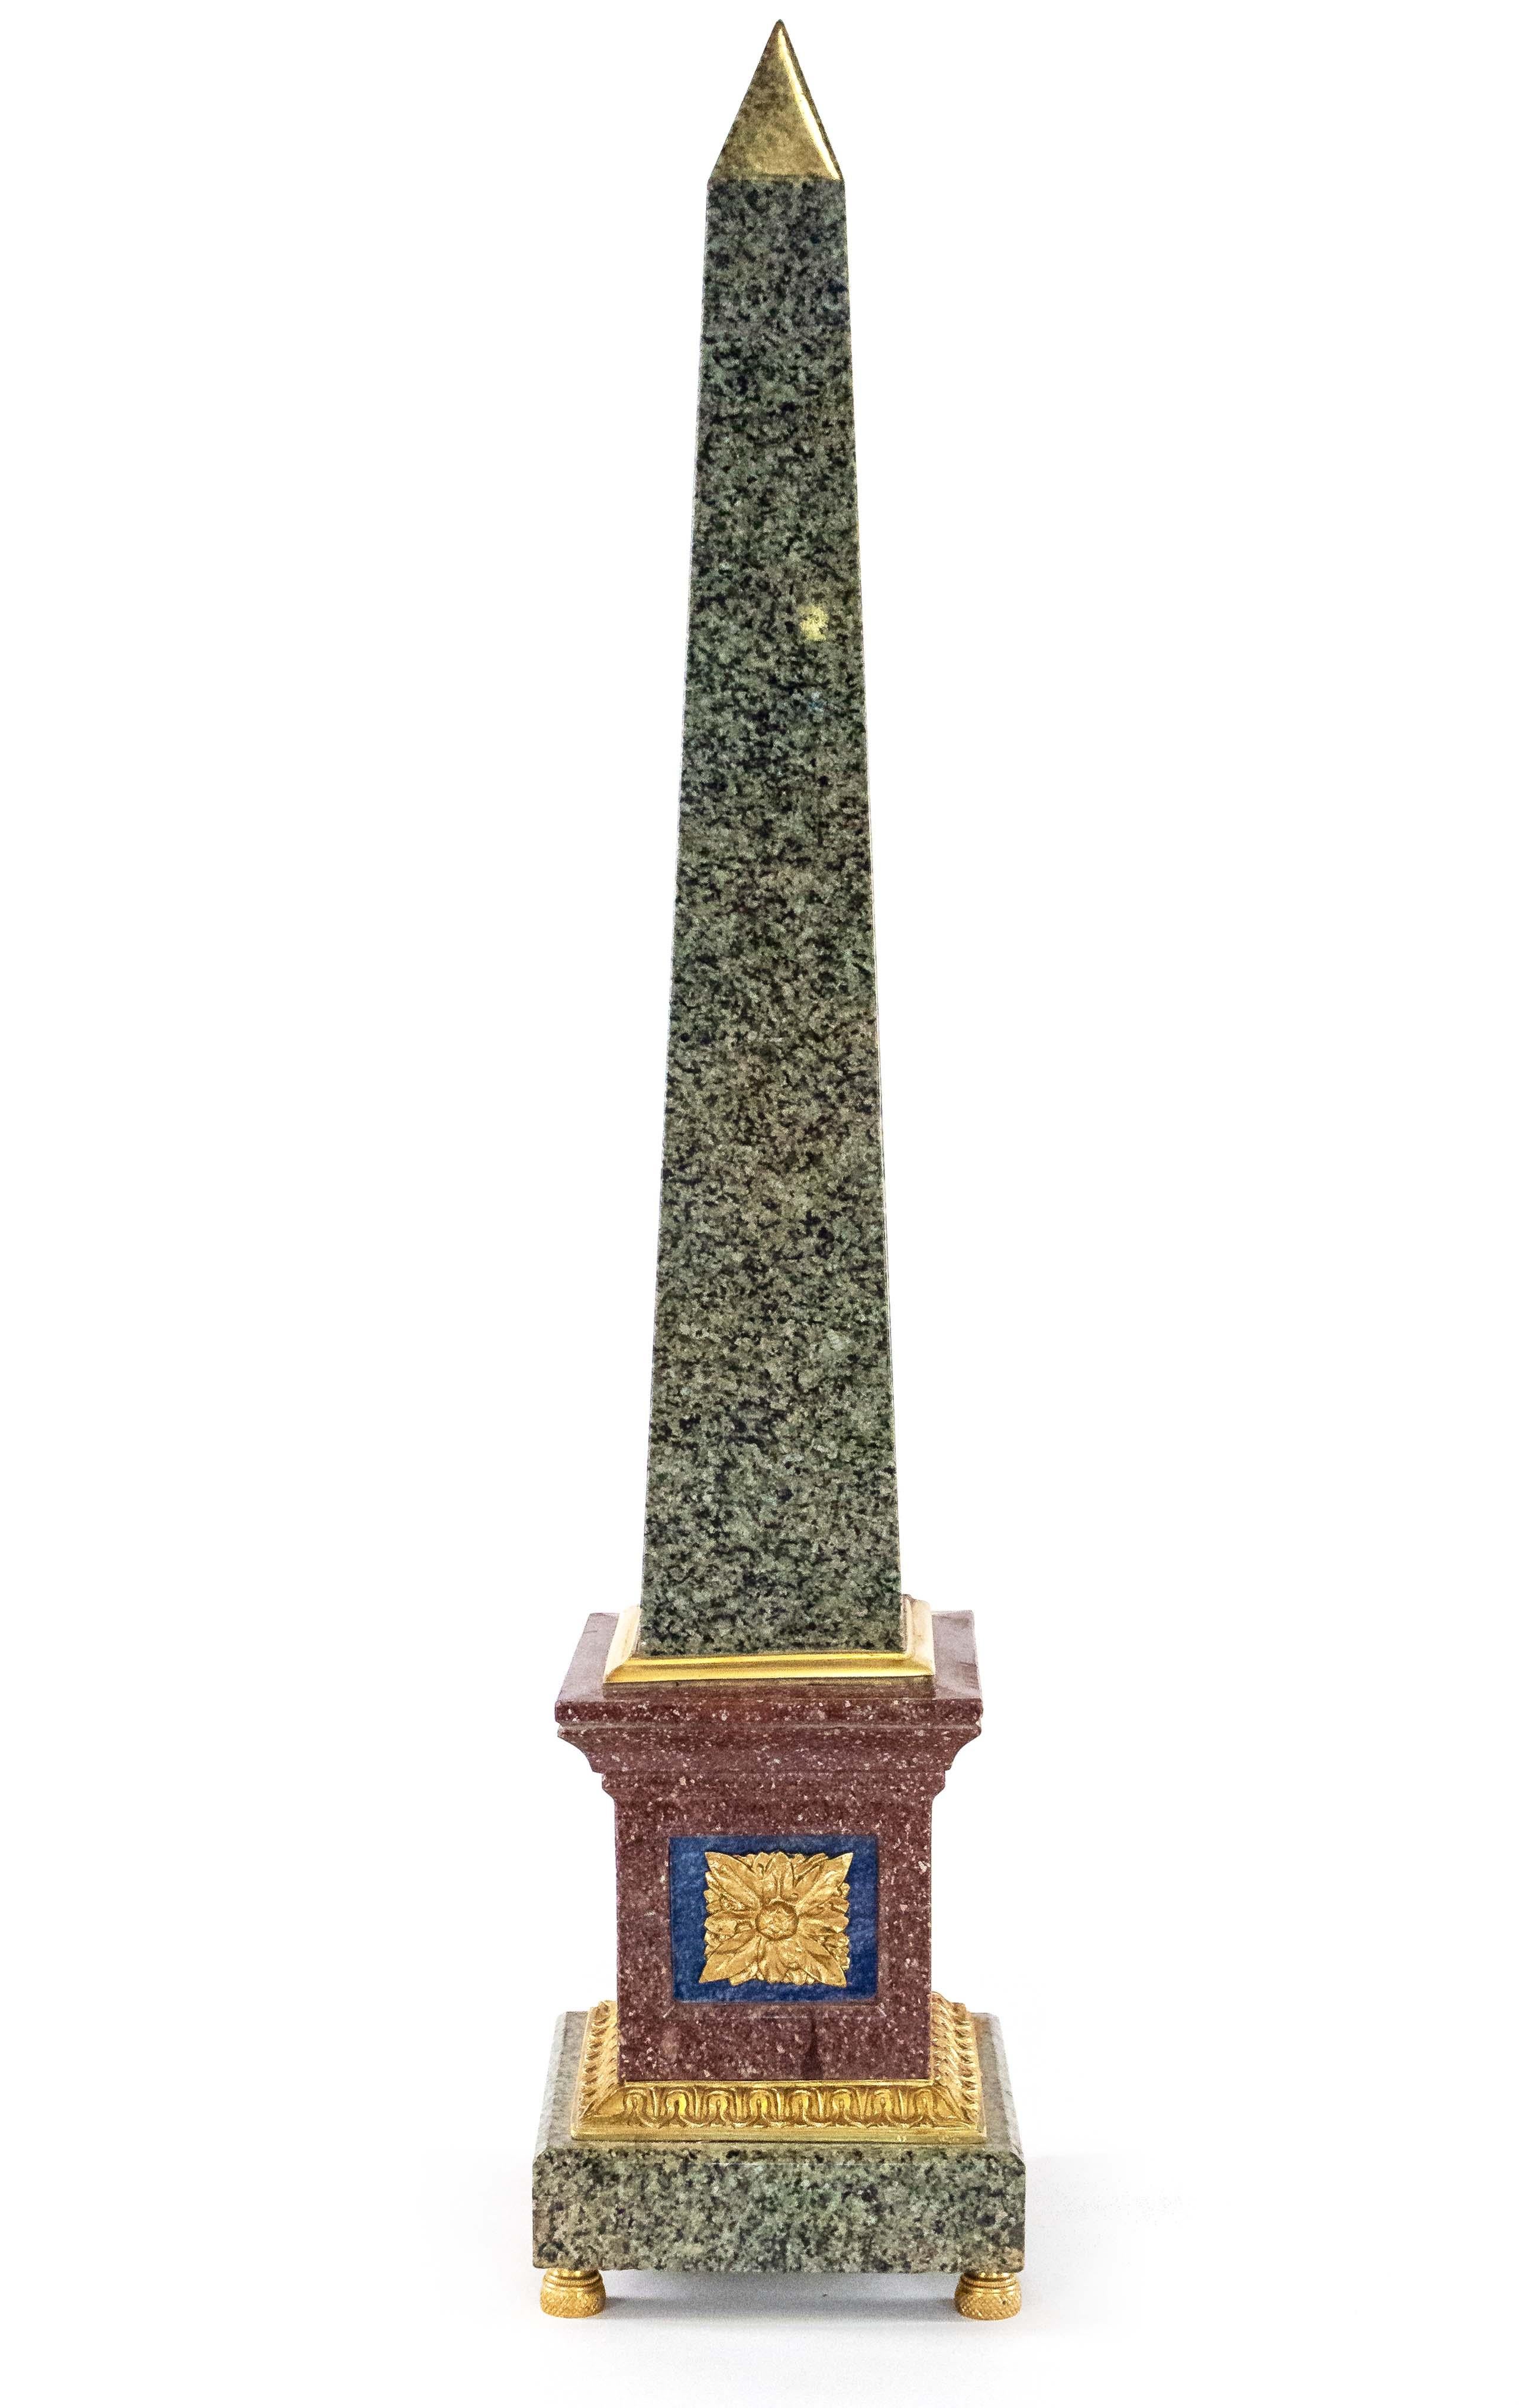 Pair of Italian Neo-classic Grand Tour-style (19/20th Century) bronze mounted hardstone obelisks with porphyry bases (PRICED AS PAIR).